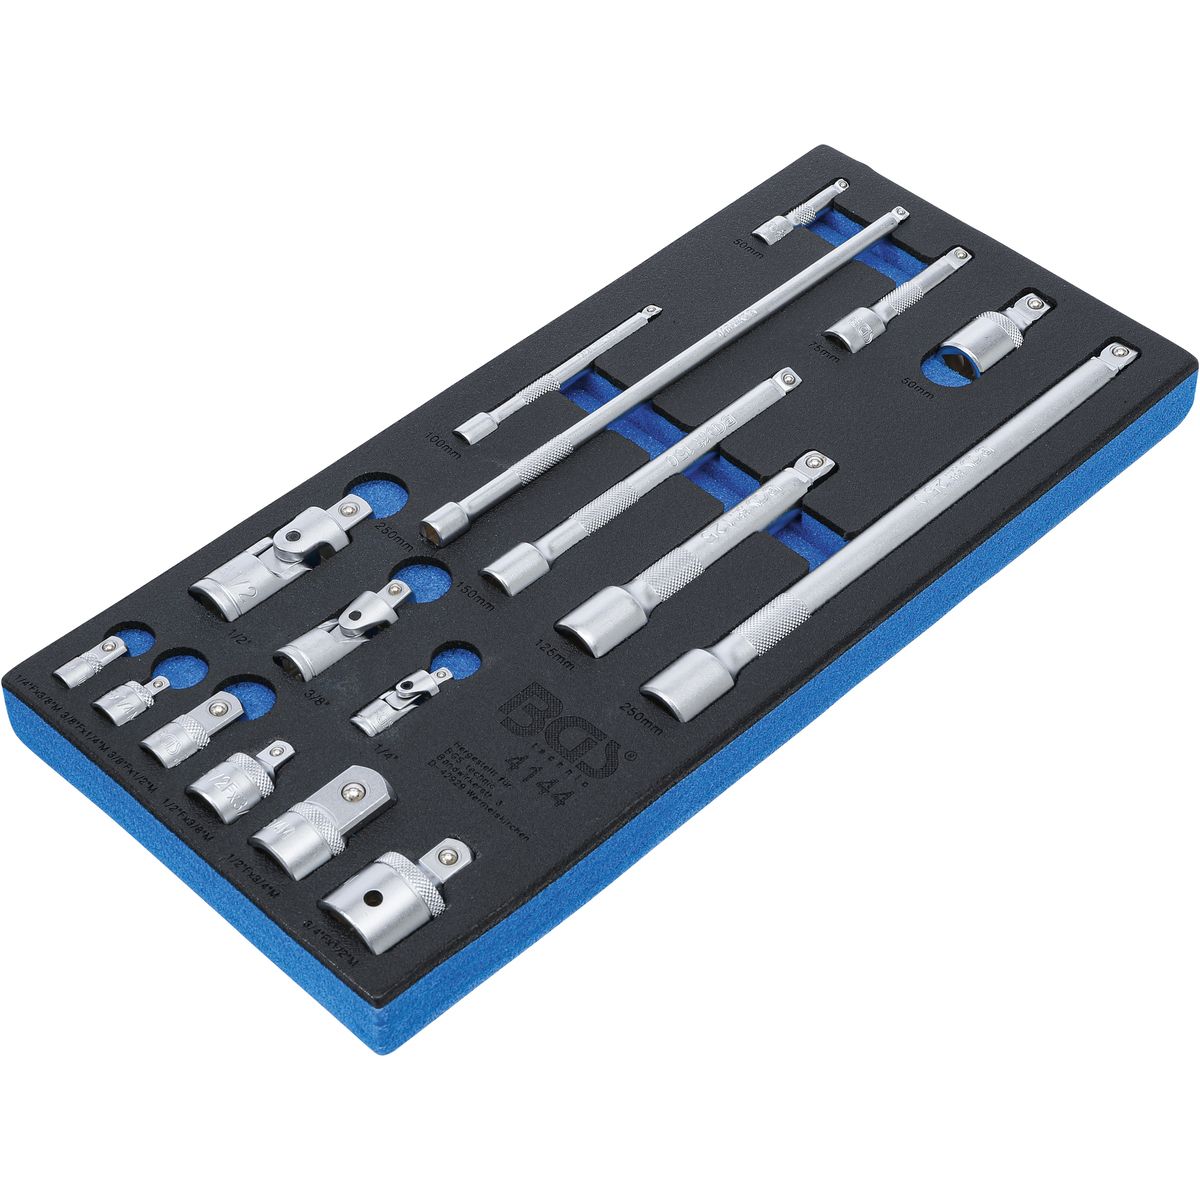 Tool Tray 1/3: Extension Bar, Adaptor and Universal Joint Set | 17 pcs.